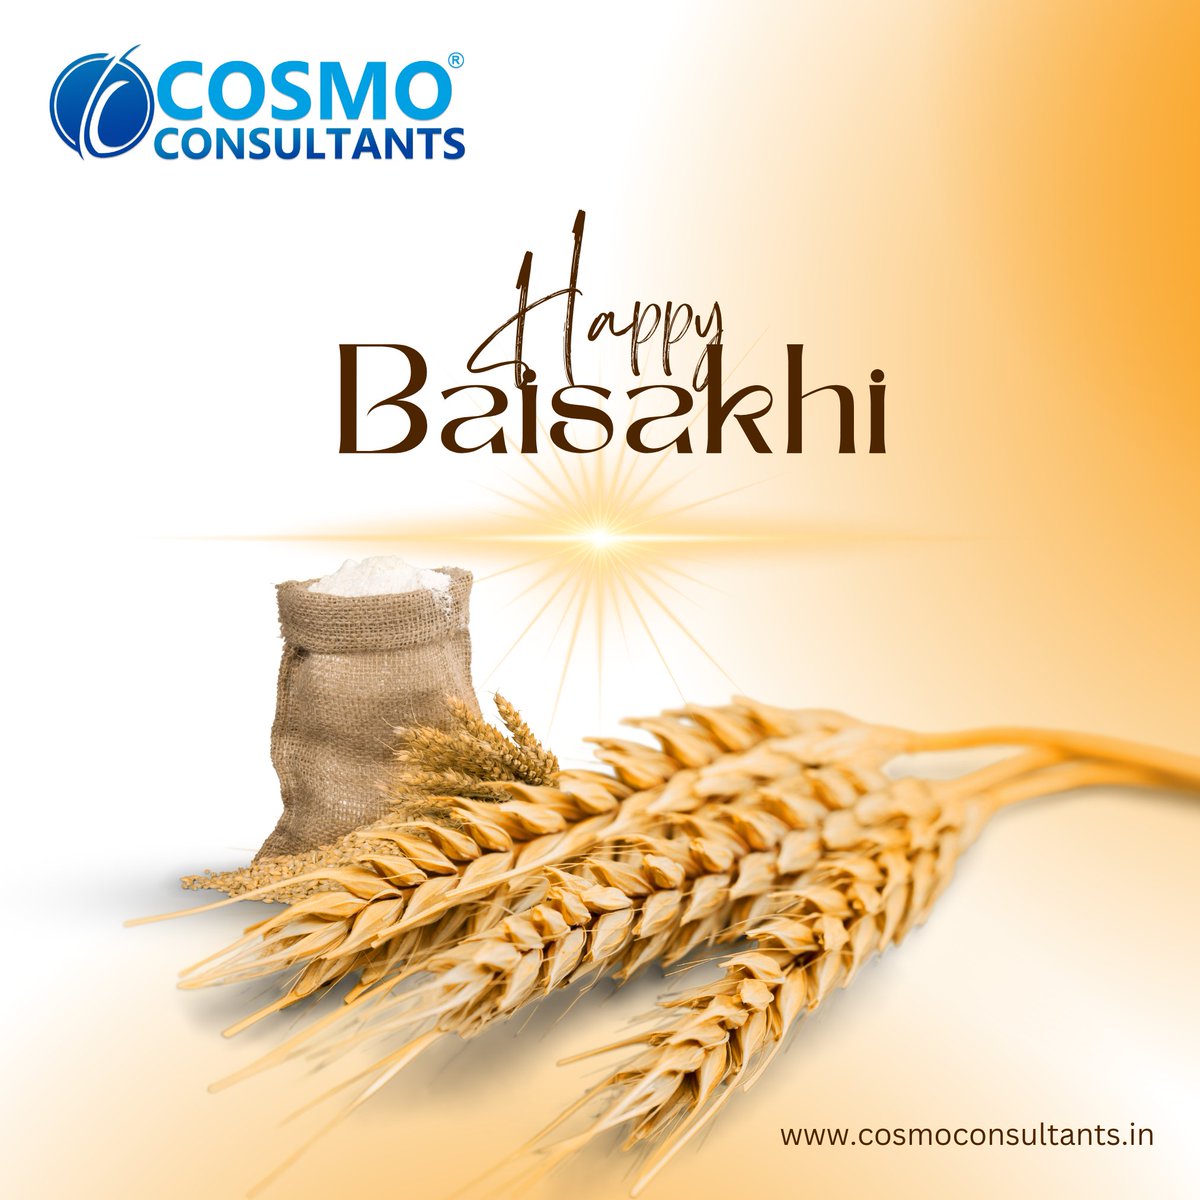 Wishing you a Baisakhi blessed with good health, wealth, and endless opportunities. Happy Baisakhi !!

#CosmoConsultants #Baisakhi #HappyBaisakhi #HappyBaisakhi2024 #festival